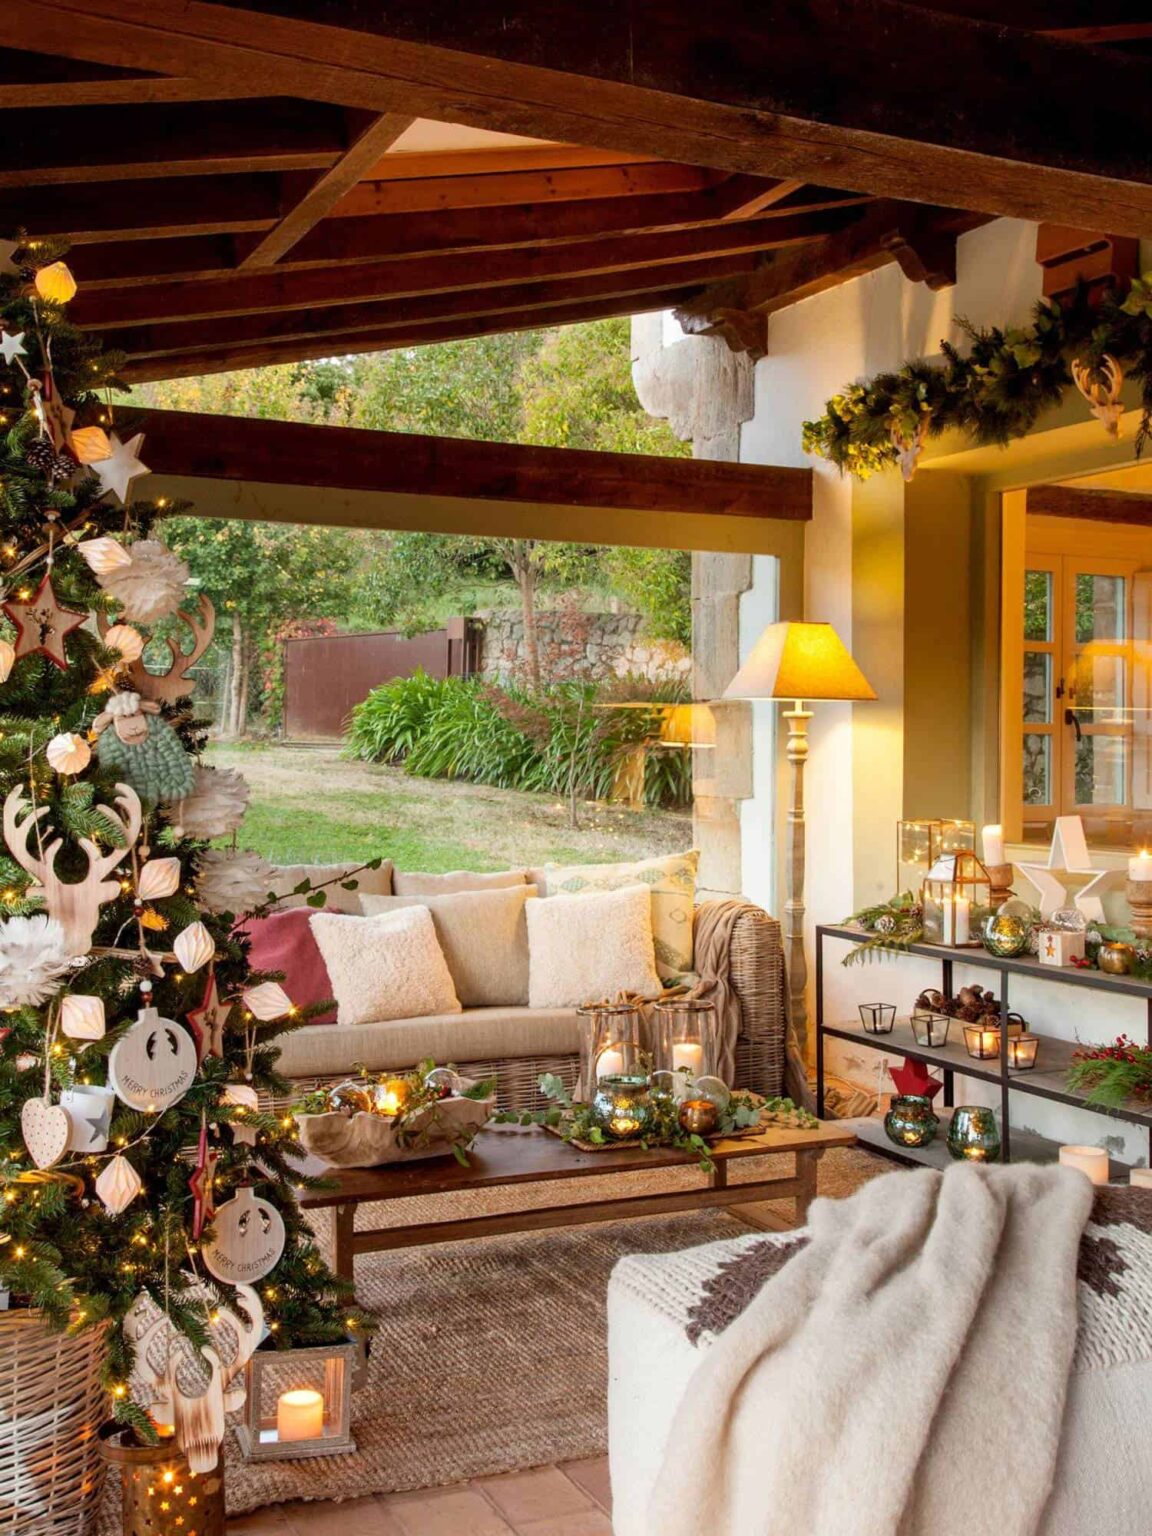 How to Make Your Patio Cozy during Winter - Talkdecor